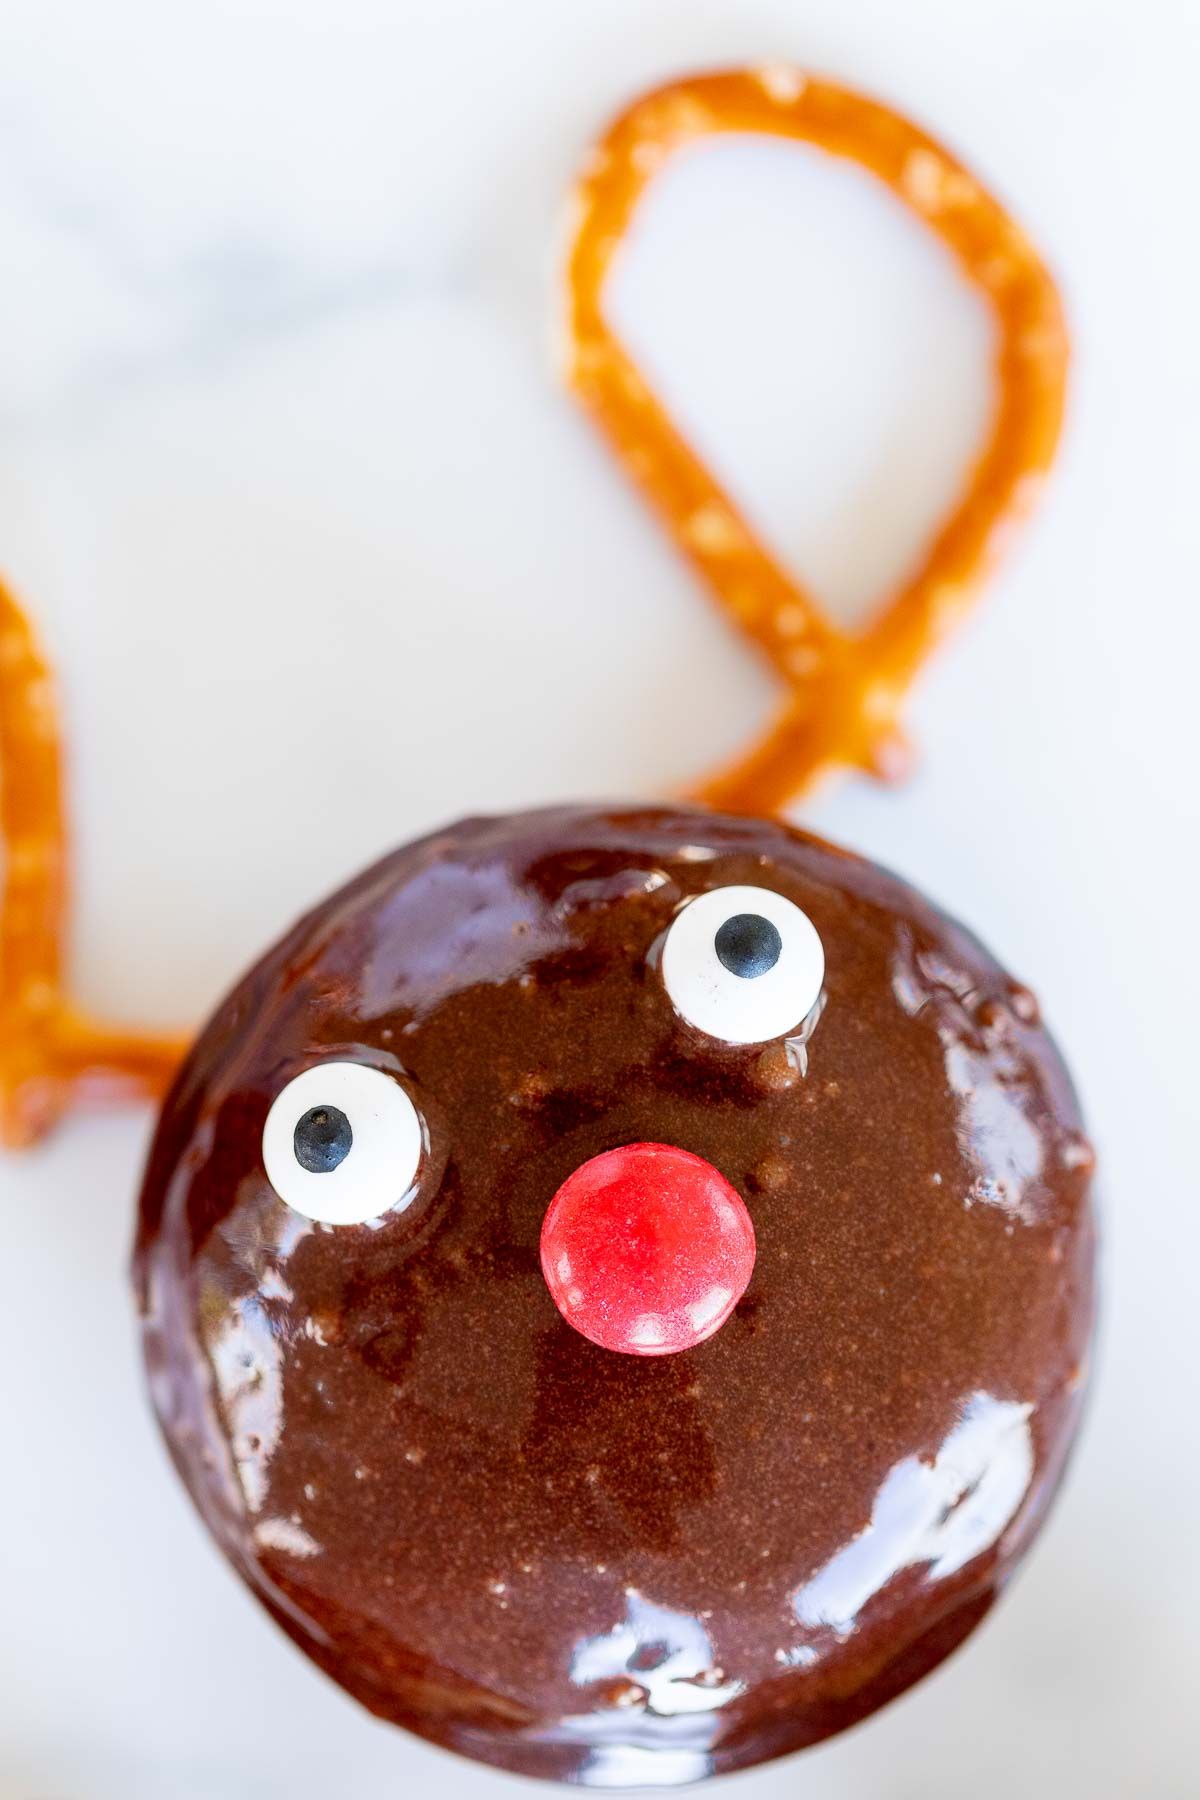 A homemade chocolate reindeer donut on a marble surface.